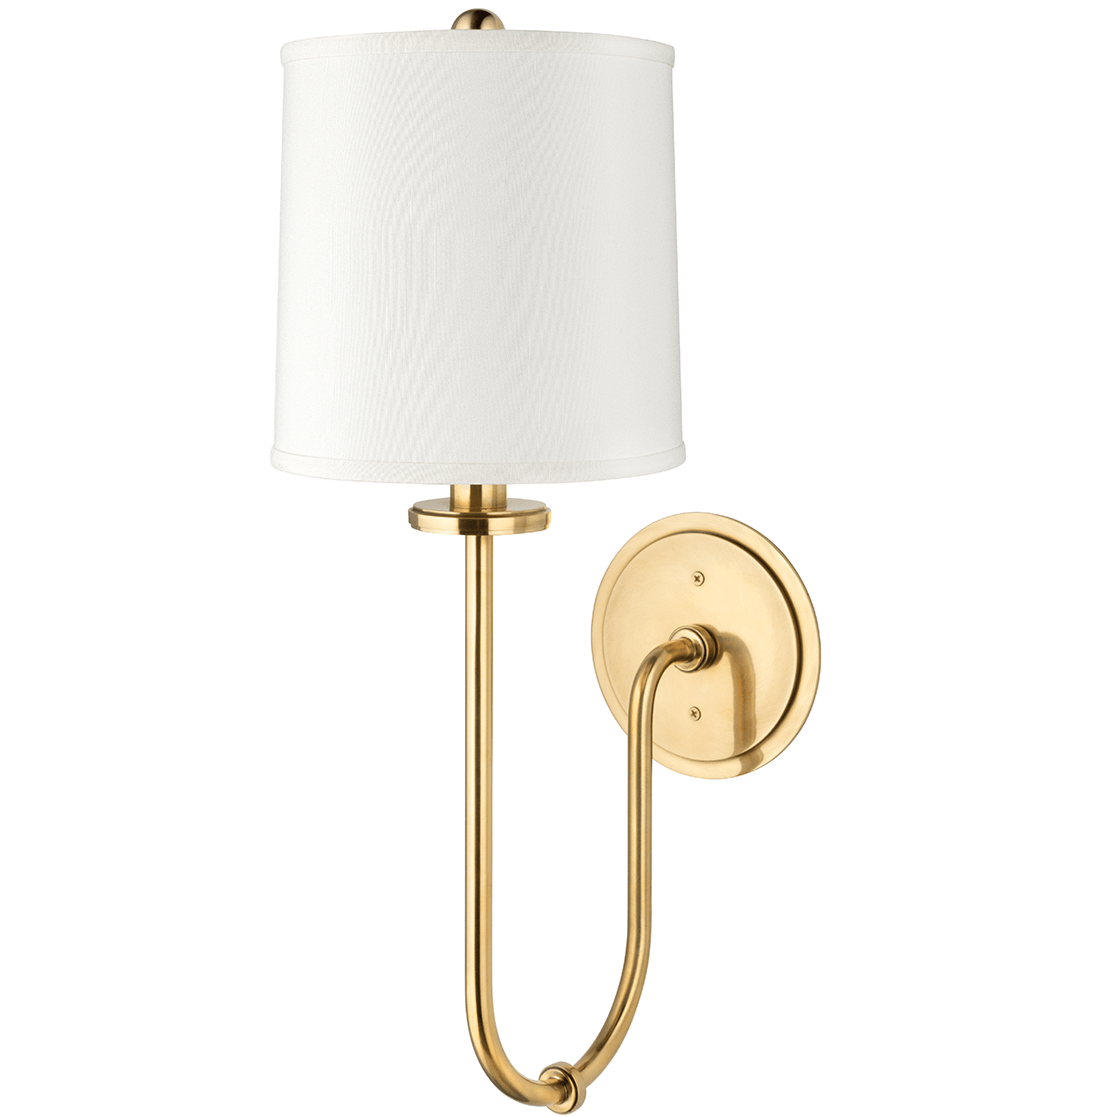 Hudson Valley Jericho Wall Sconce Lighting